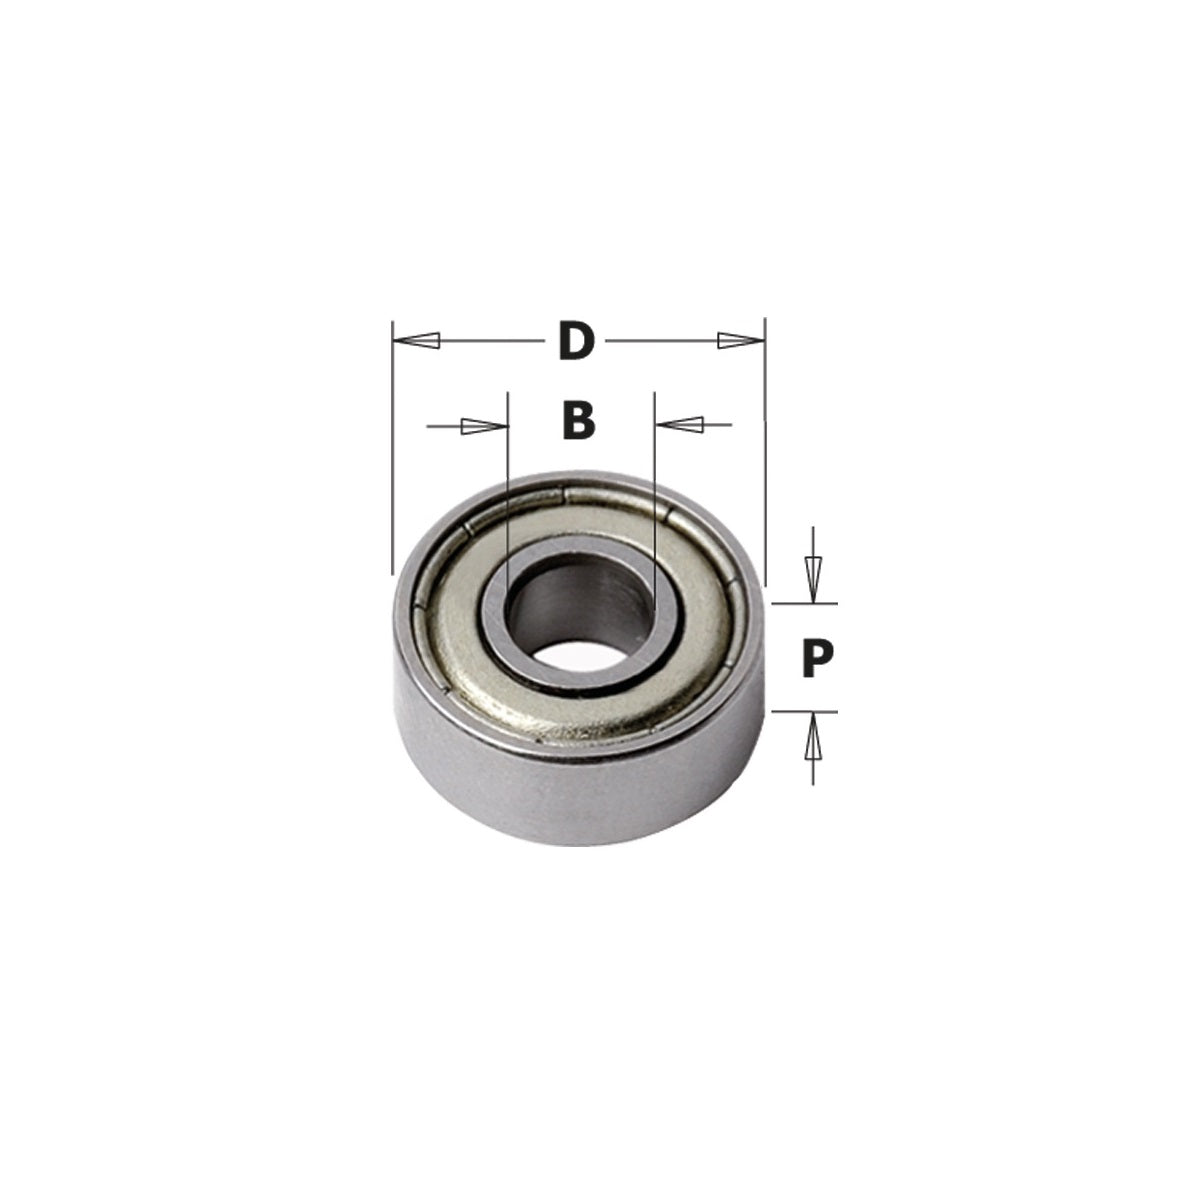 Replacement steel bearing for milling cutter, diameter 16 mm - CMT 791.025.00